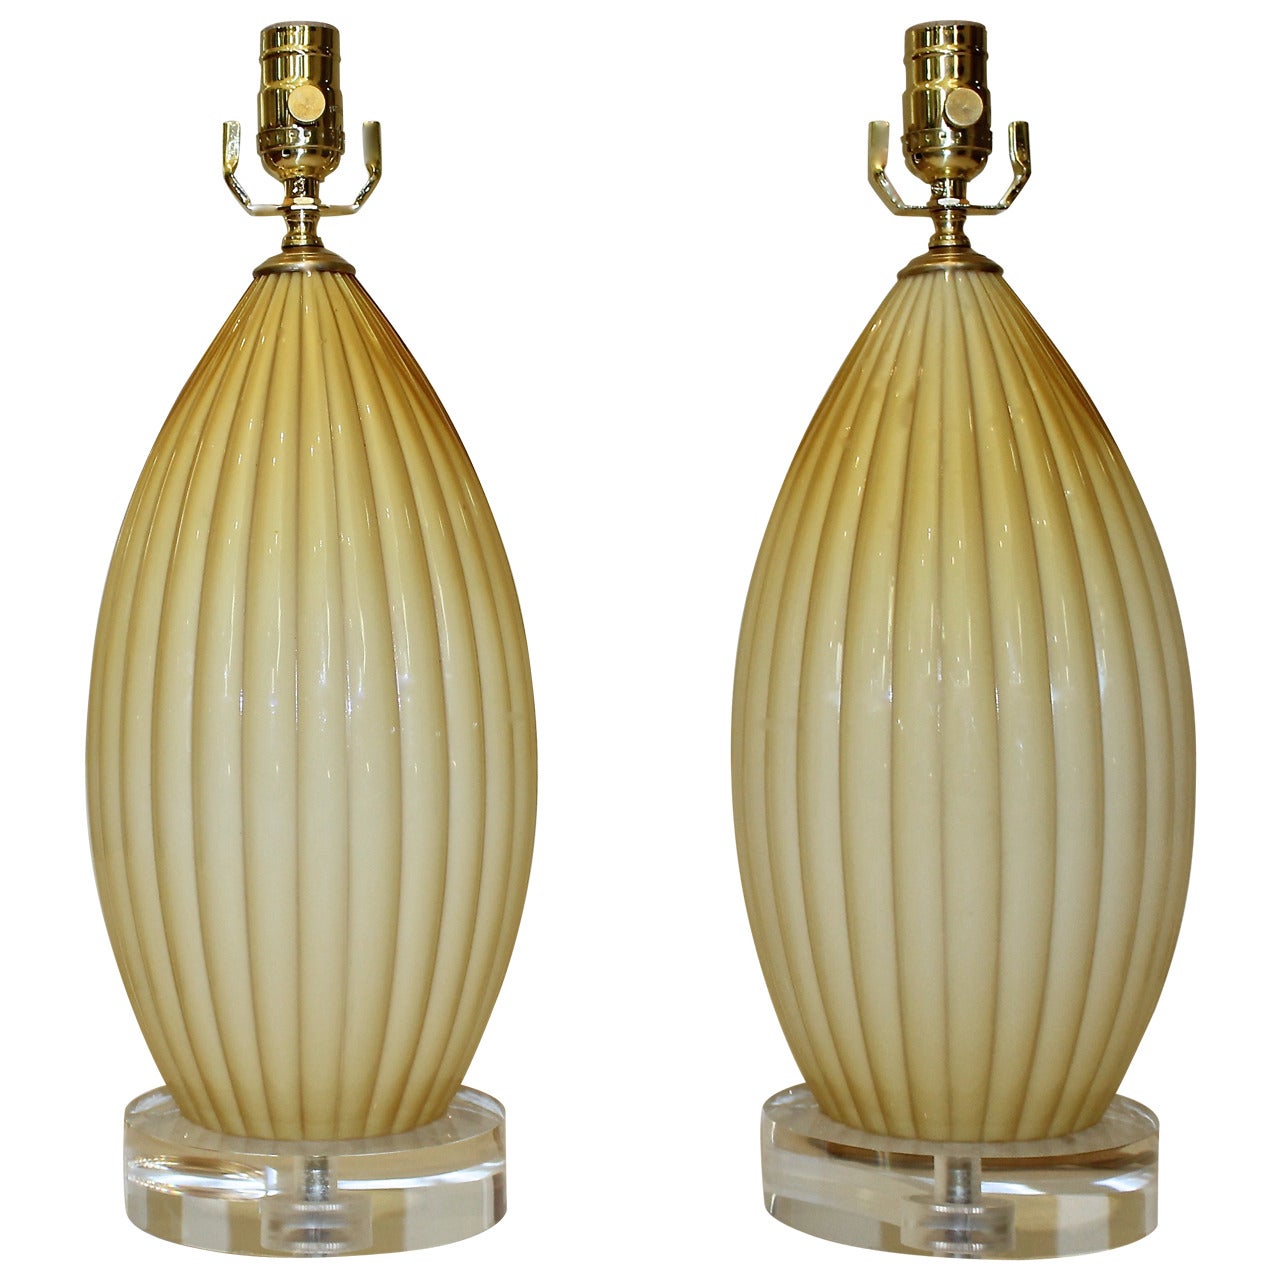 Pair of Butterscotch Cased Murano Glass Lamps